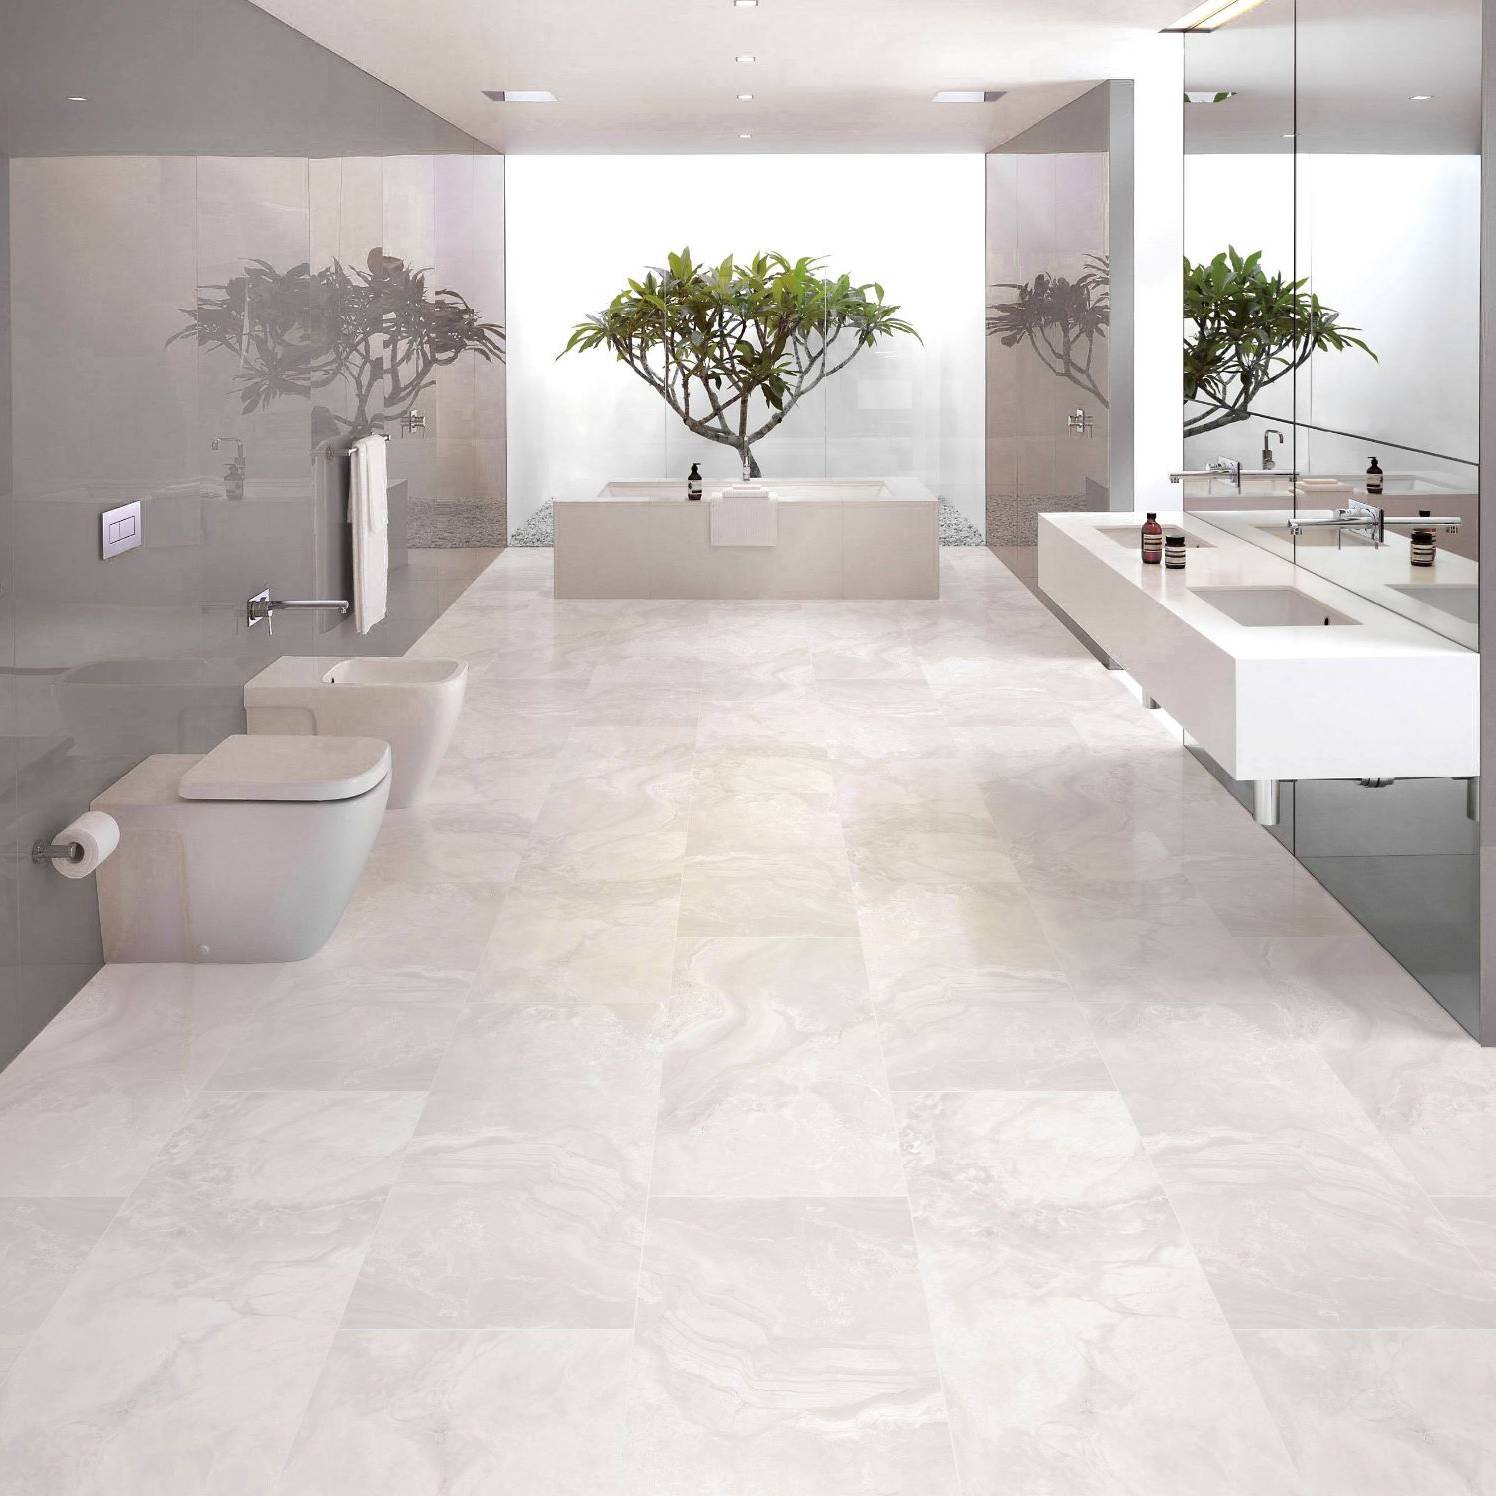 Dream_2_G | Stones & More | Finest selection of Mosaics, Glass, Tile and Stone